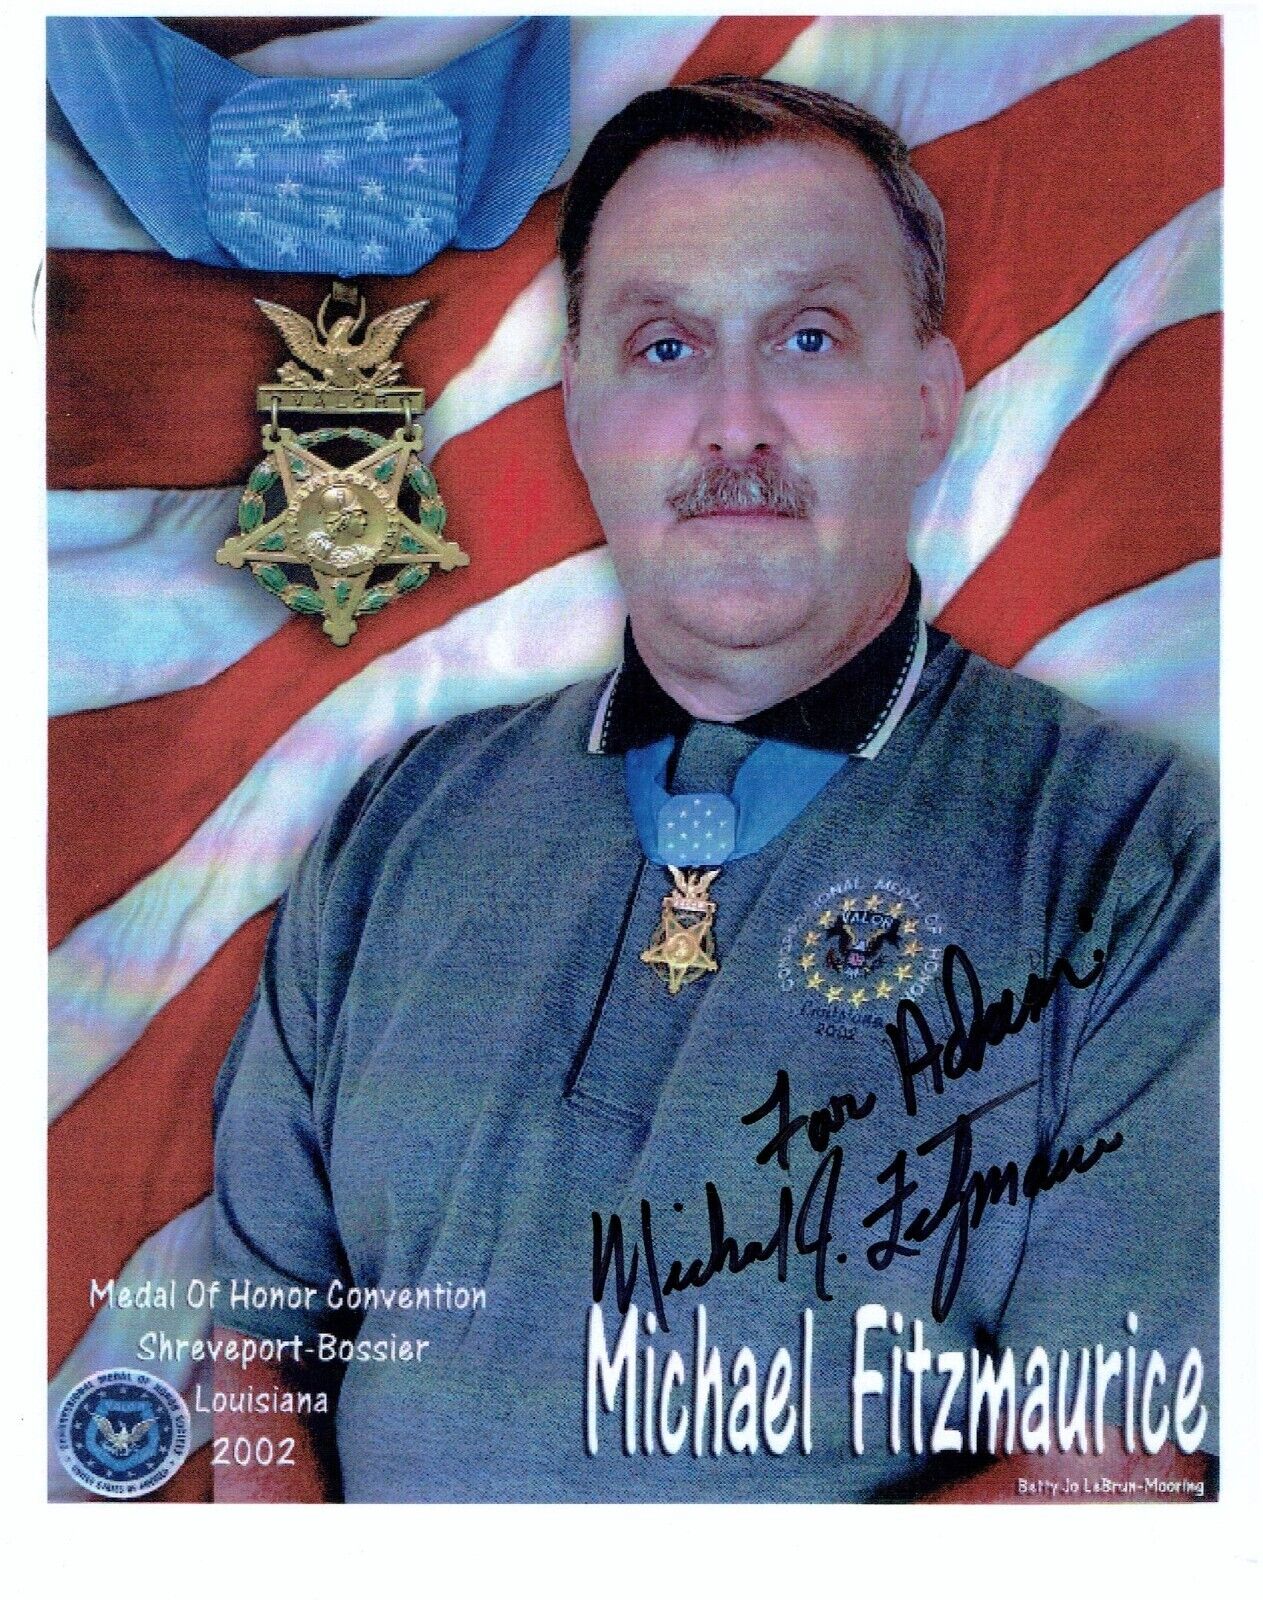 MICHAEL FITZMARICE SIGNED PHOTO -MEDAL OF HONOR DURING VIETNAM WAR